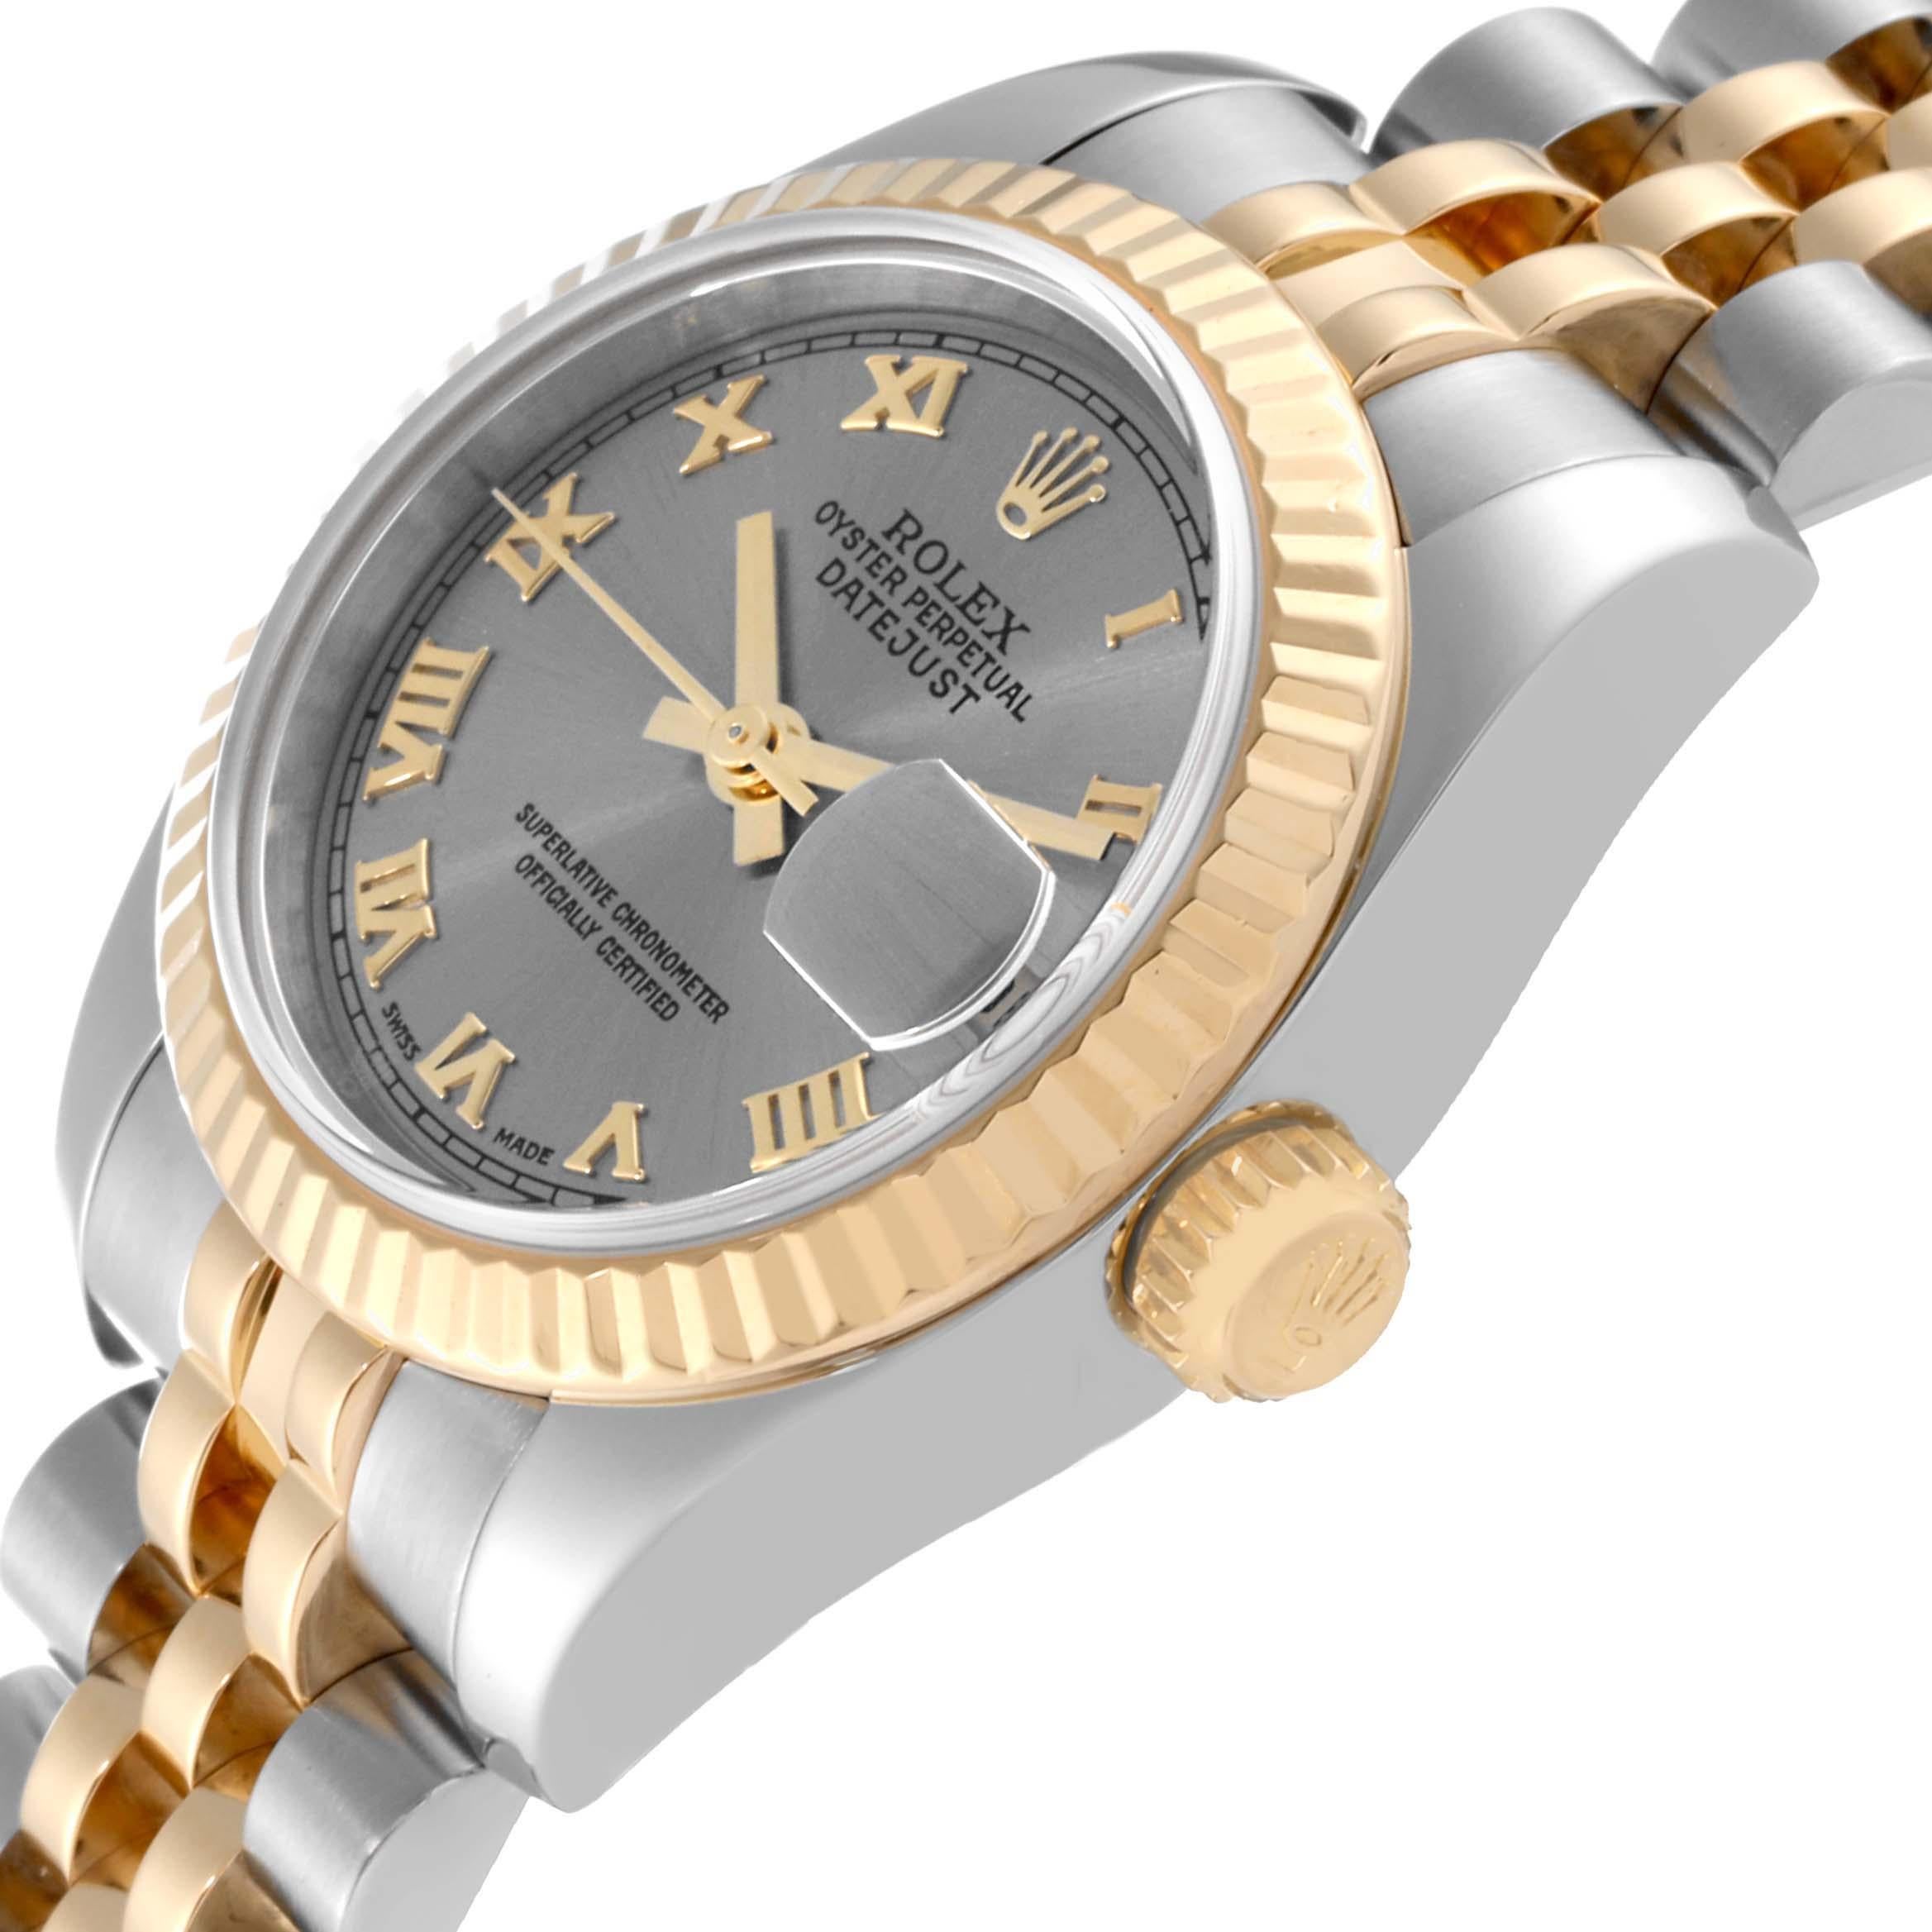 Rolex Datejust Steel Yellow Gold Slate Dial Ladies Watch 179173 Box Card In Excellent Condition For Sale In Atlanta, GA